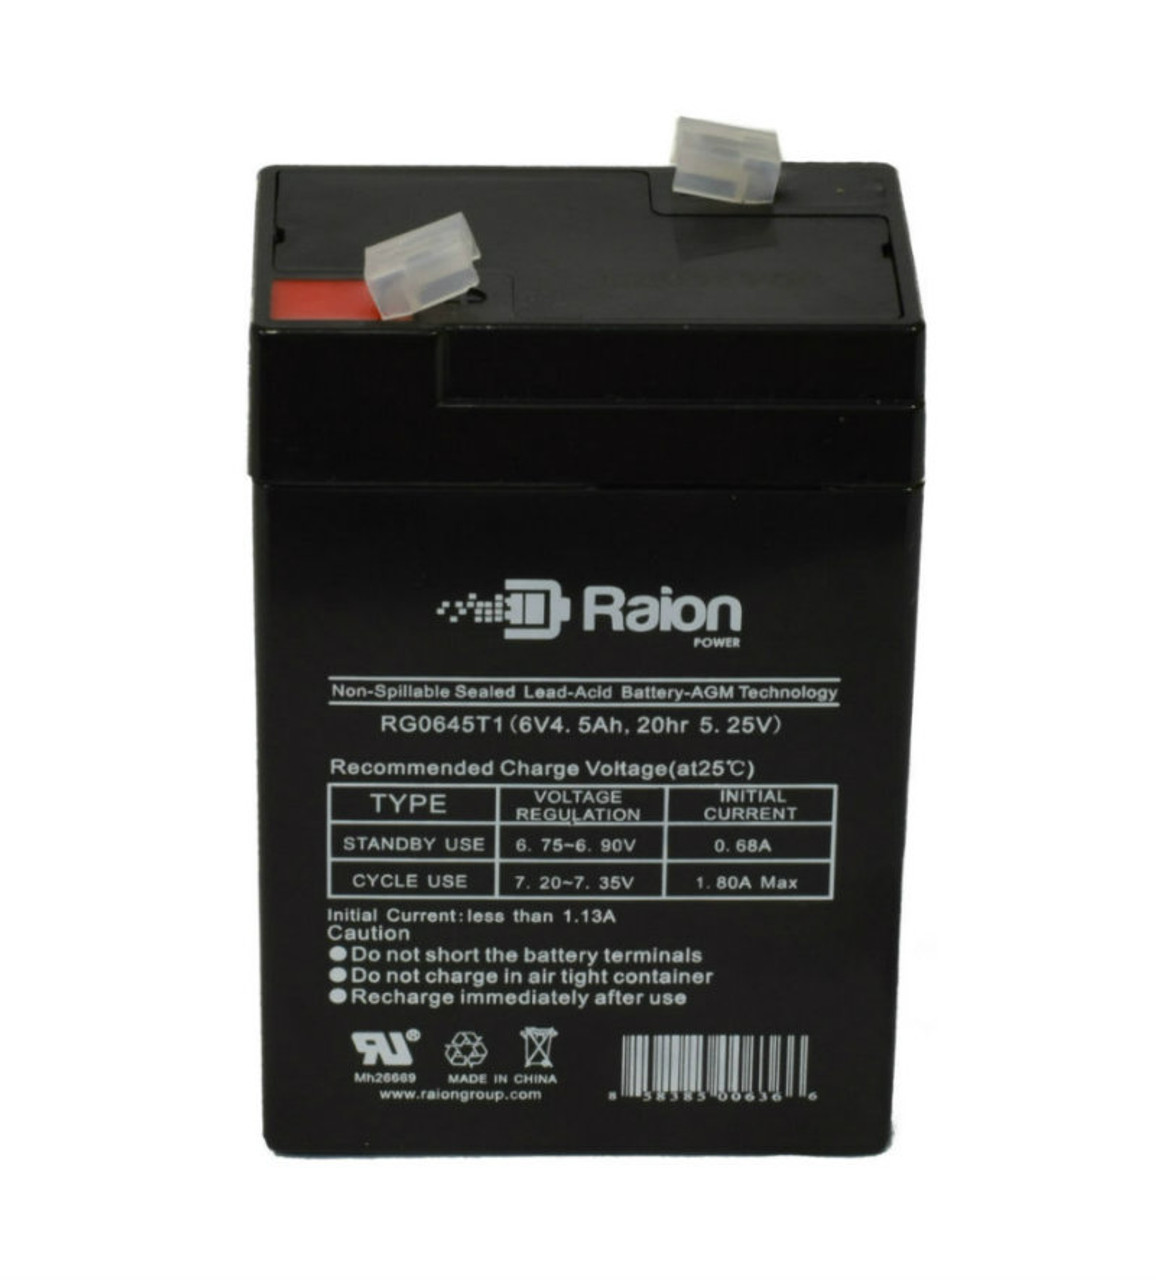 Raion Power RG0645T1 Replacement Battery Cartridge for Tork 650